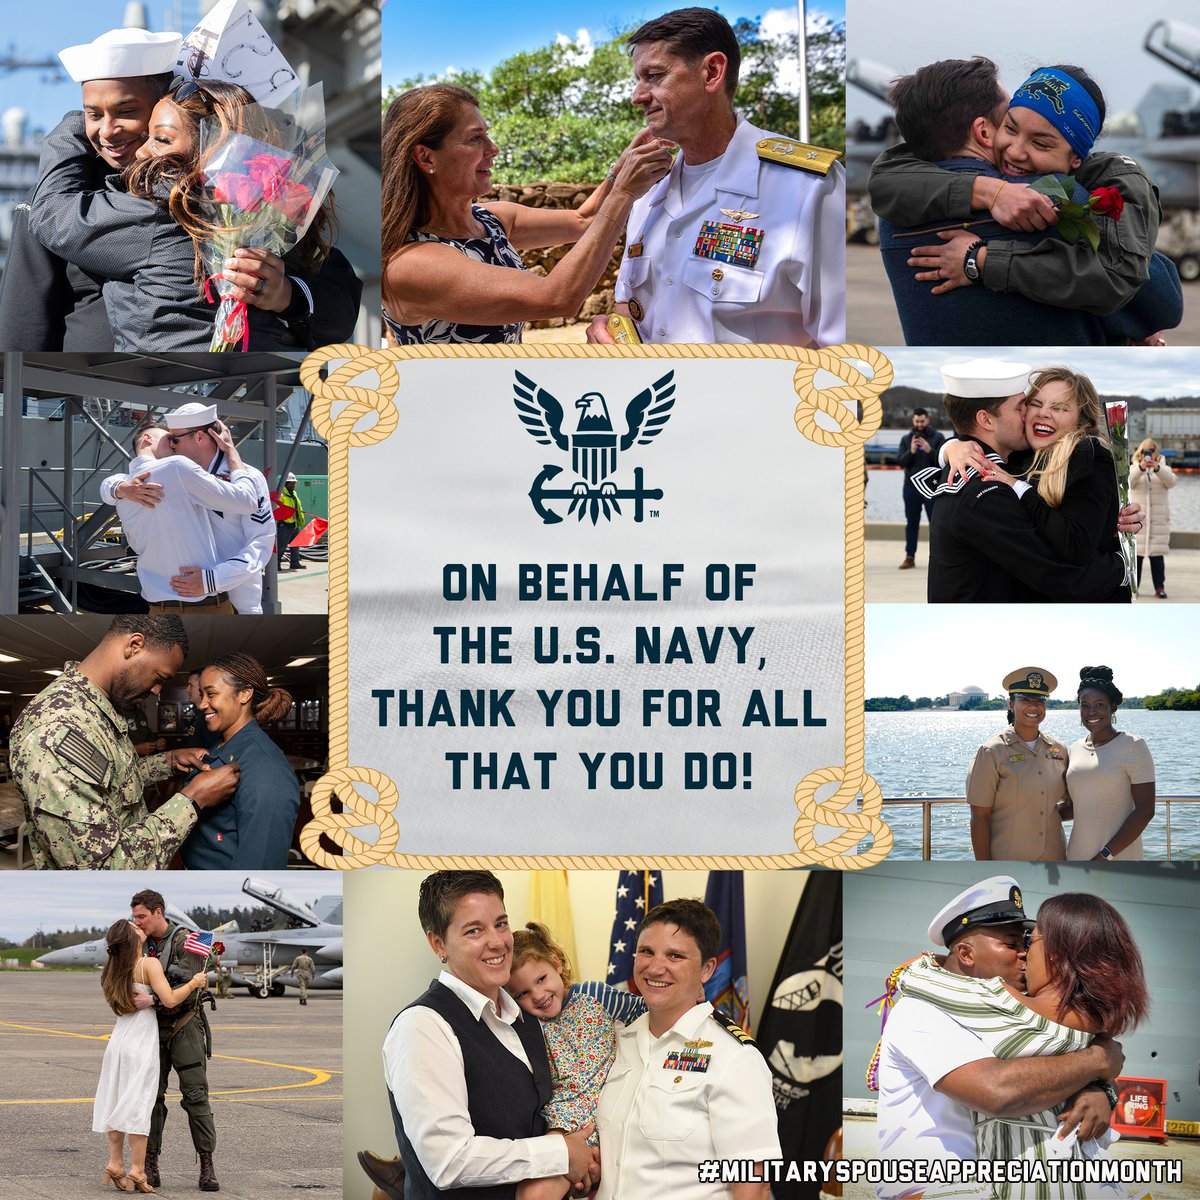 From shore to ship, Navy spouses keep the love afloat with strength and style. BZ to our maritime MVPs! ⚓ RT to show the love for military spouses worldwide! #MilitarySpouseAppreciationMonth